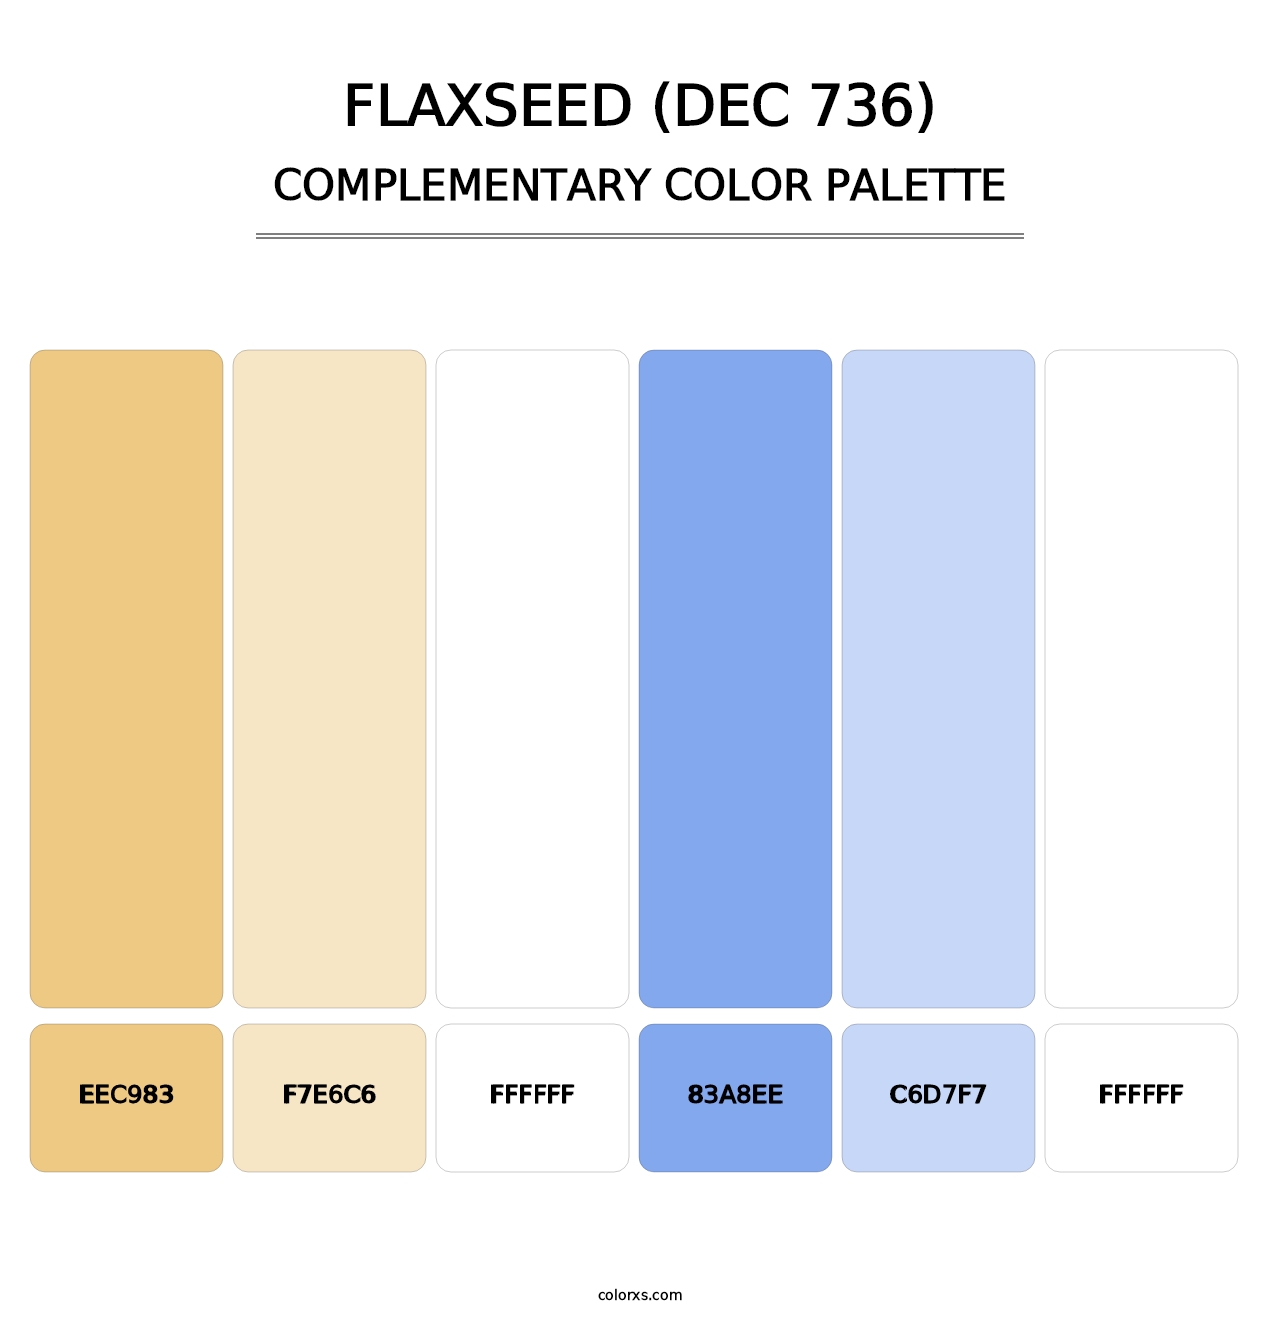 Flaxseed (DEC 736) - Complementary Color Palette